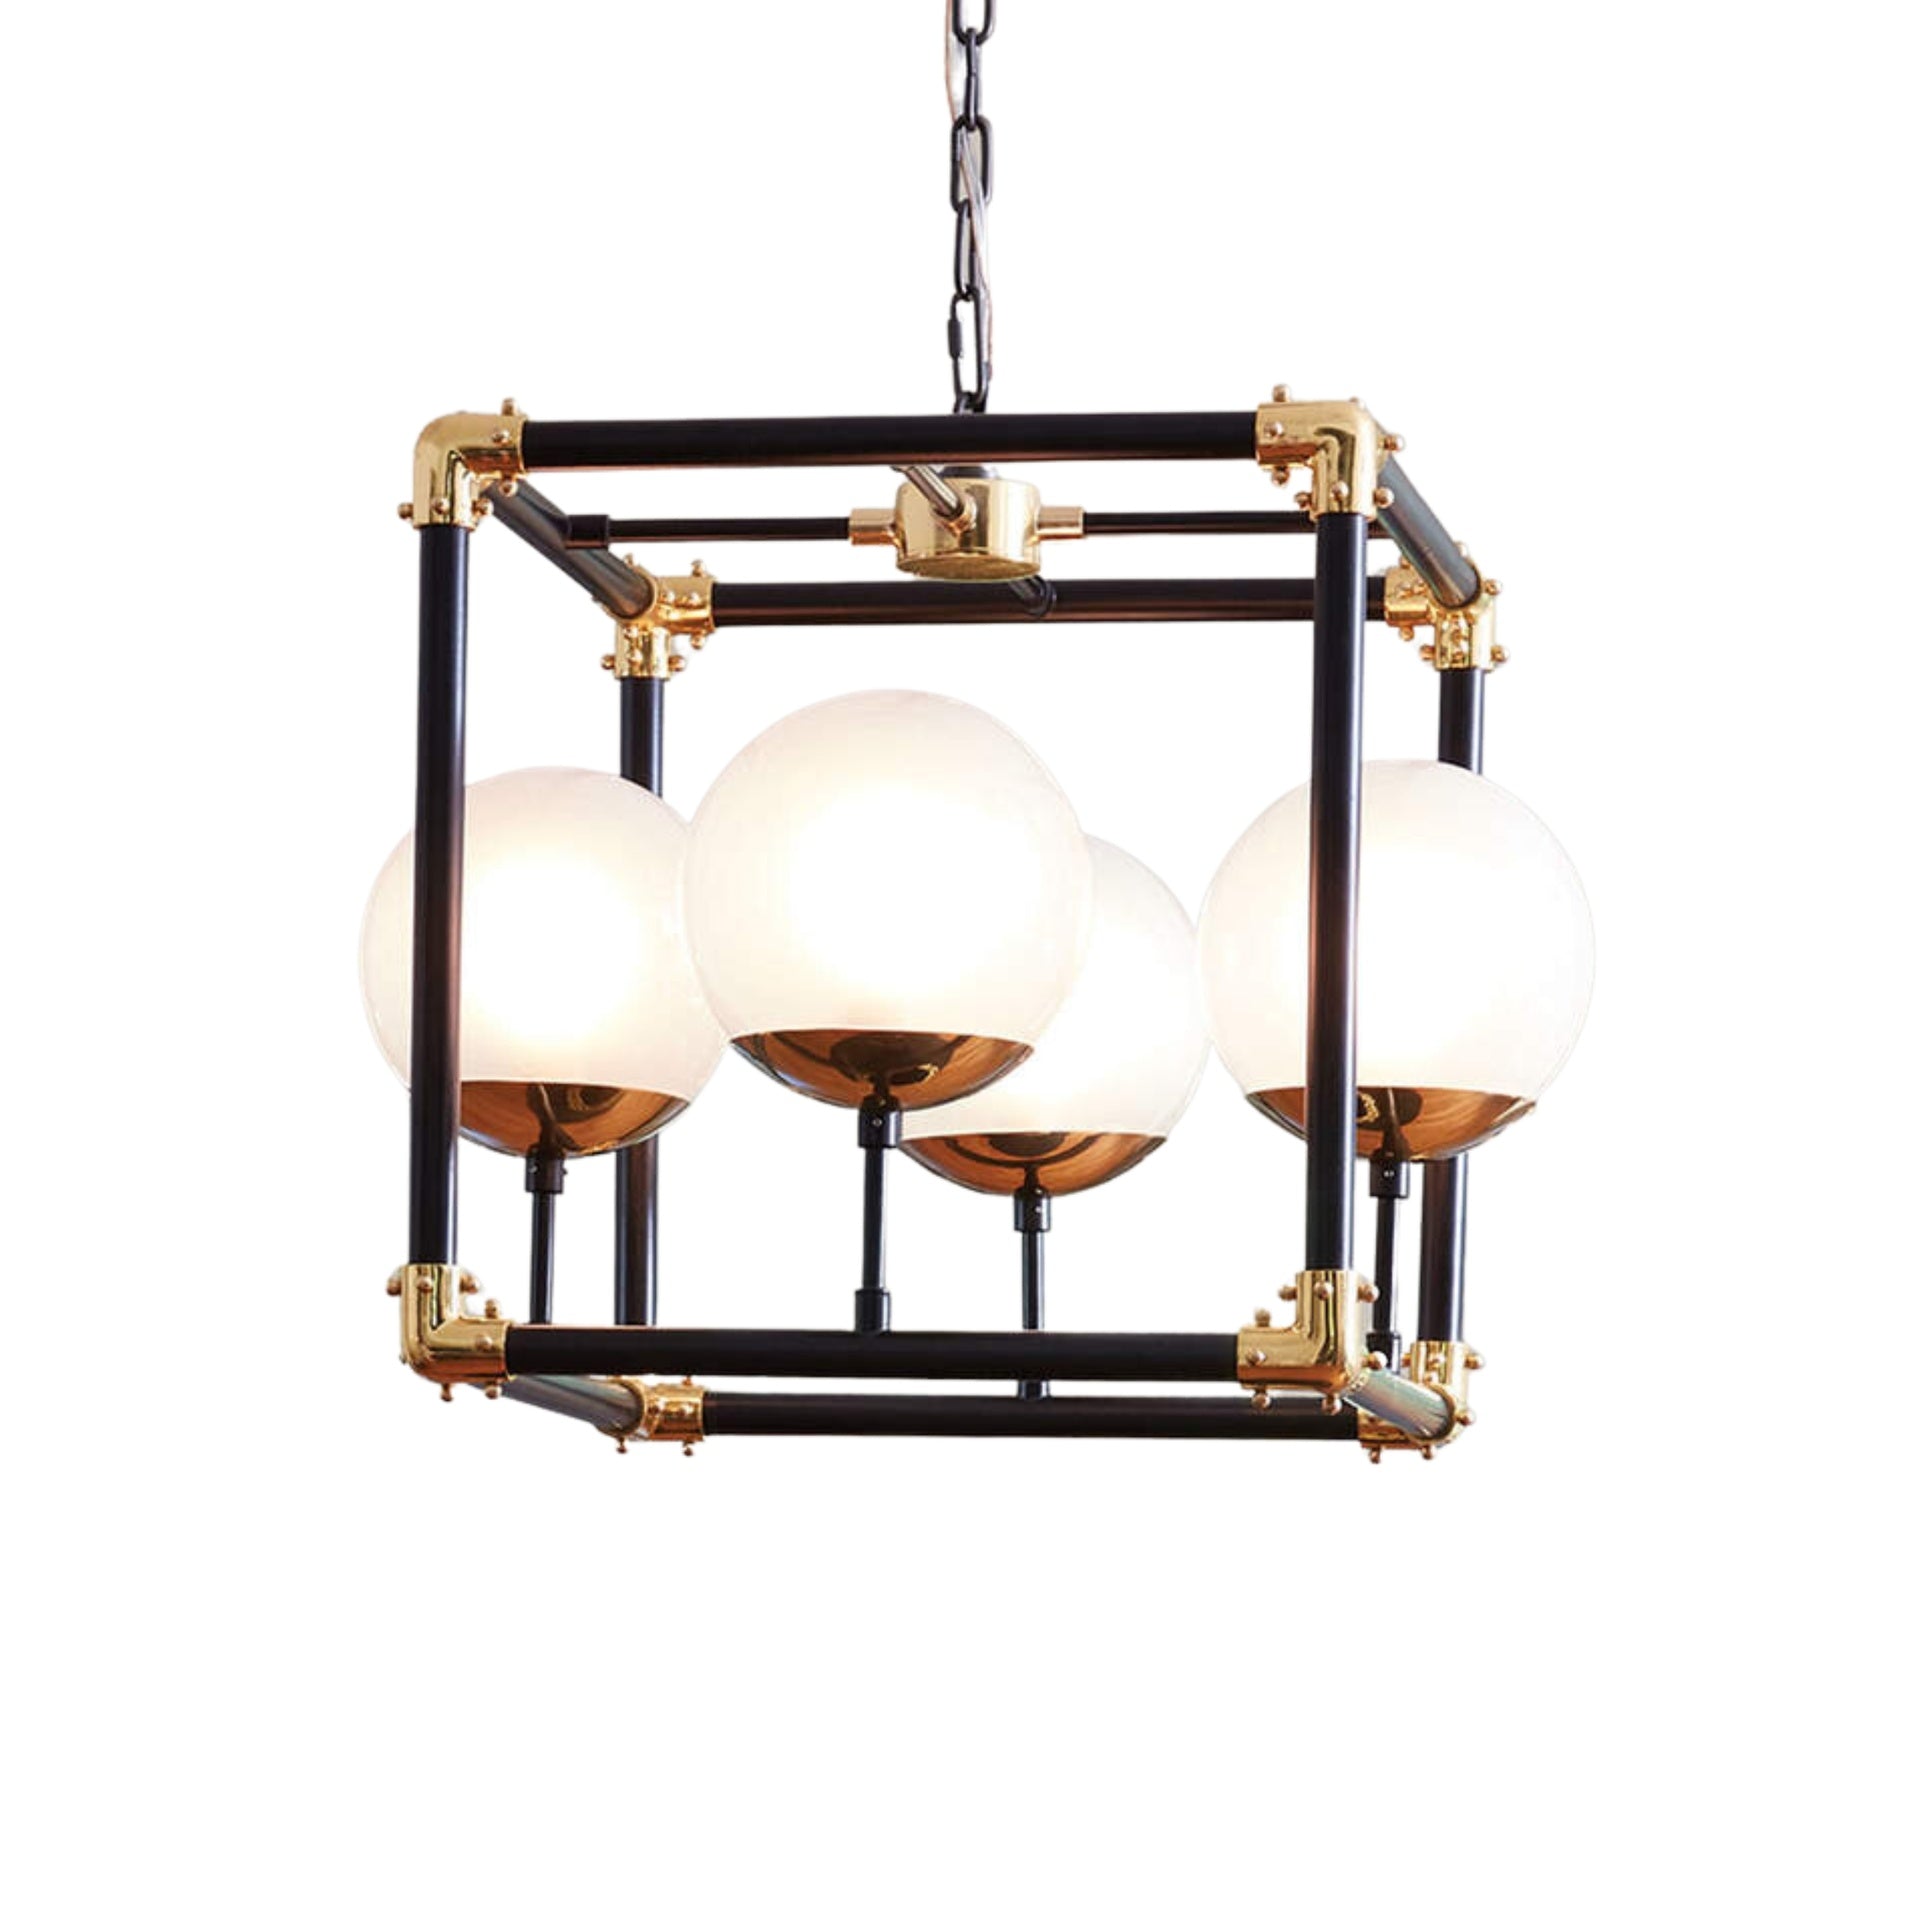 Pendant Black Cube With Gold Details And White Crystal Globes G9x4 120V/60HZ